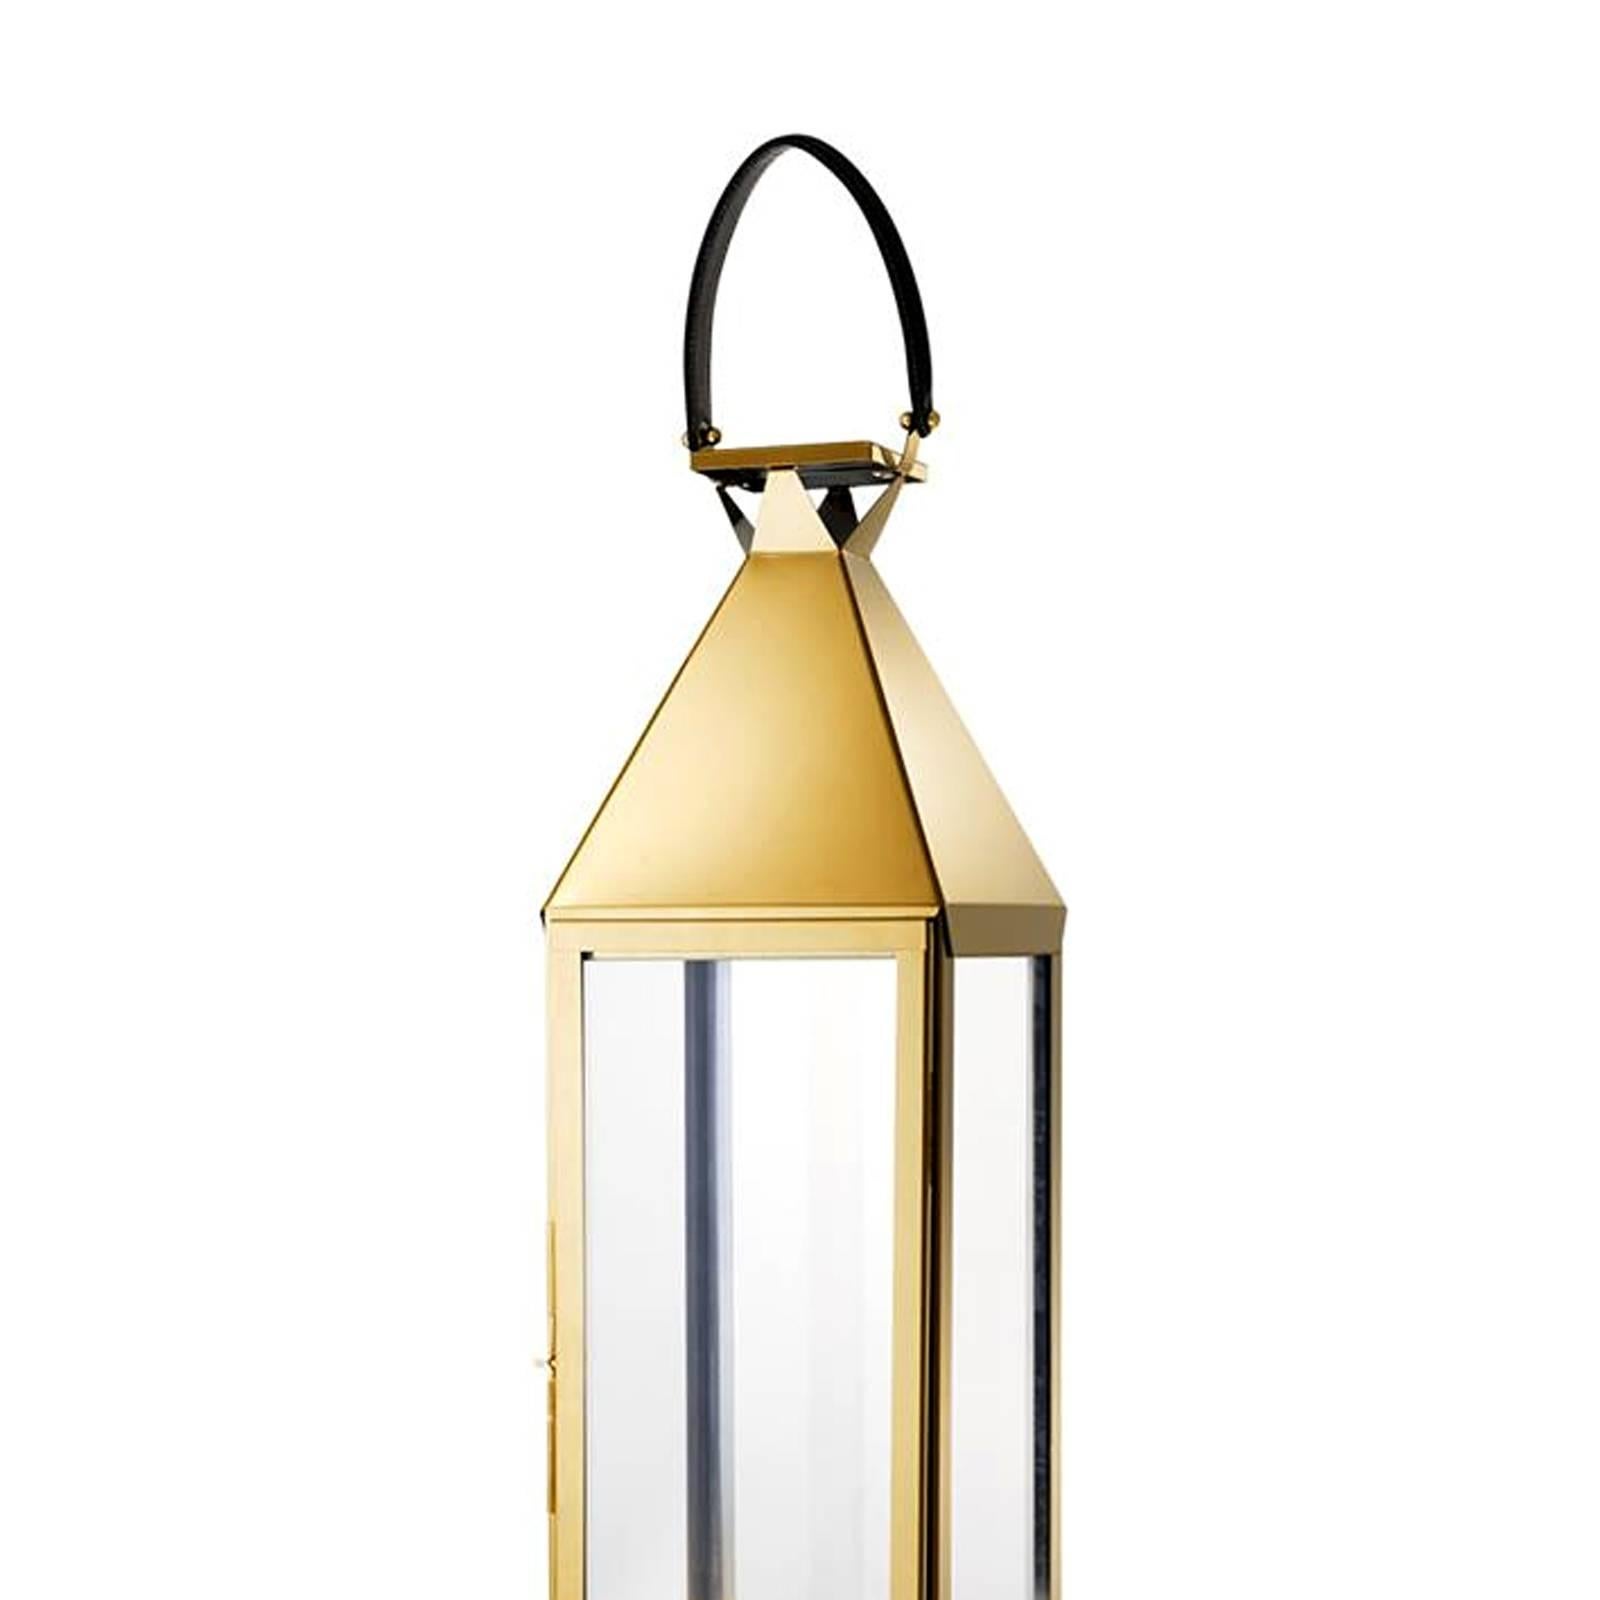 Hurricaine gold XL with structure in gold 
finish and clear glass. With black leather 
handle. Also available in Huricaine Gold L.
Candle not included.
